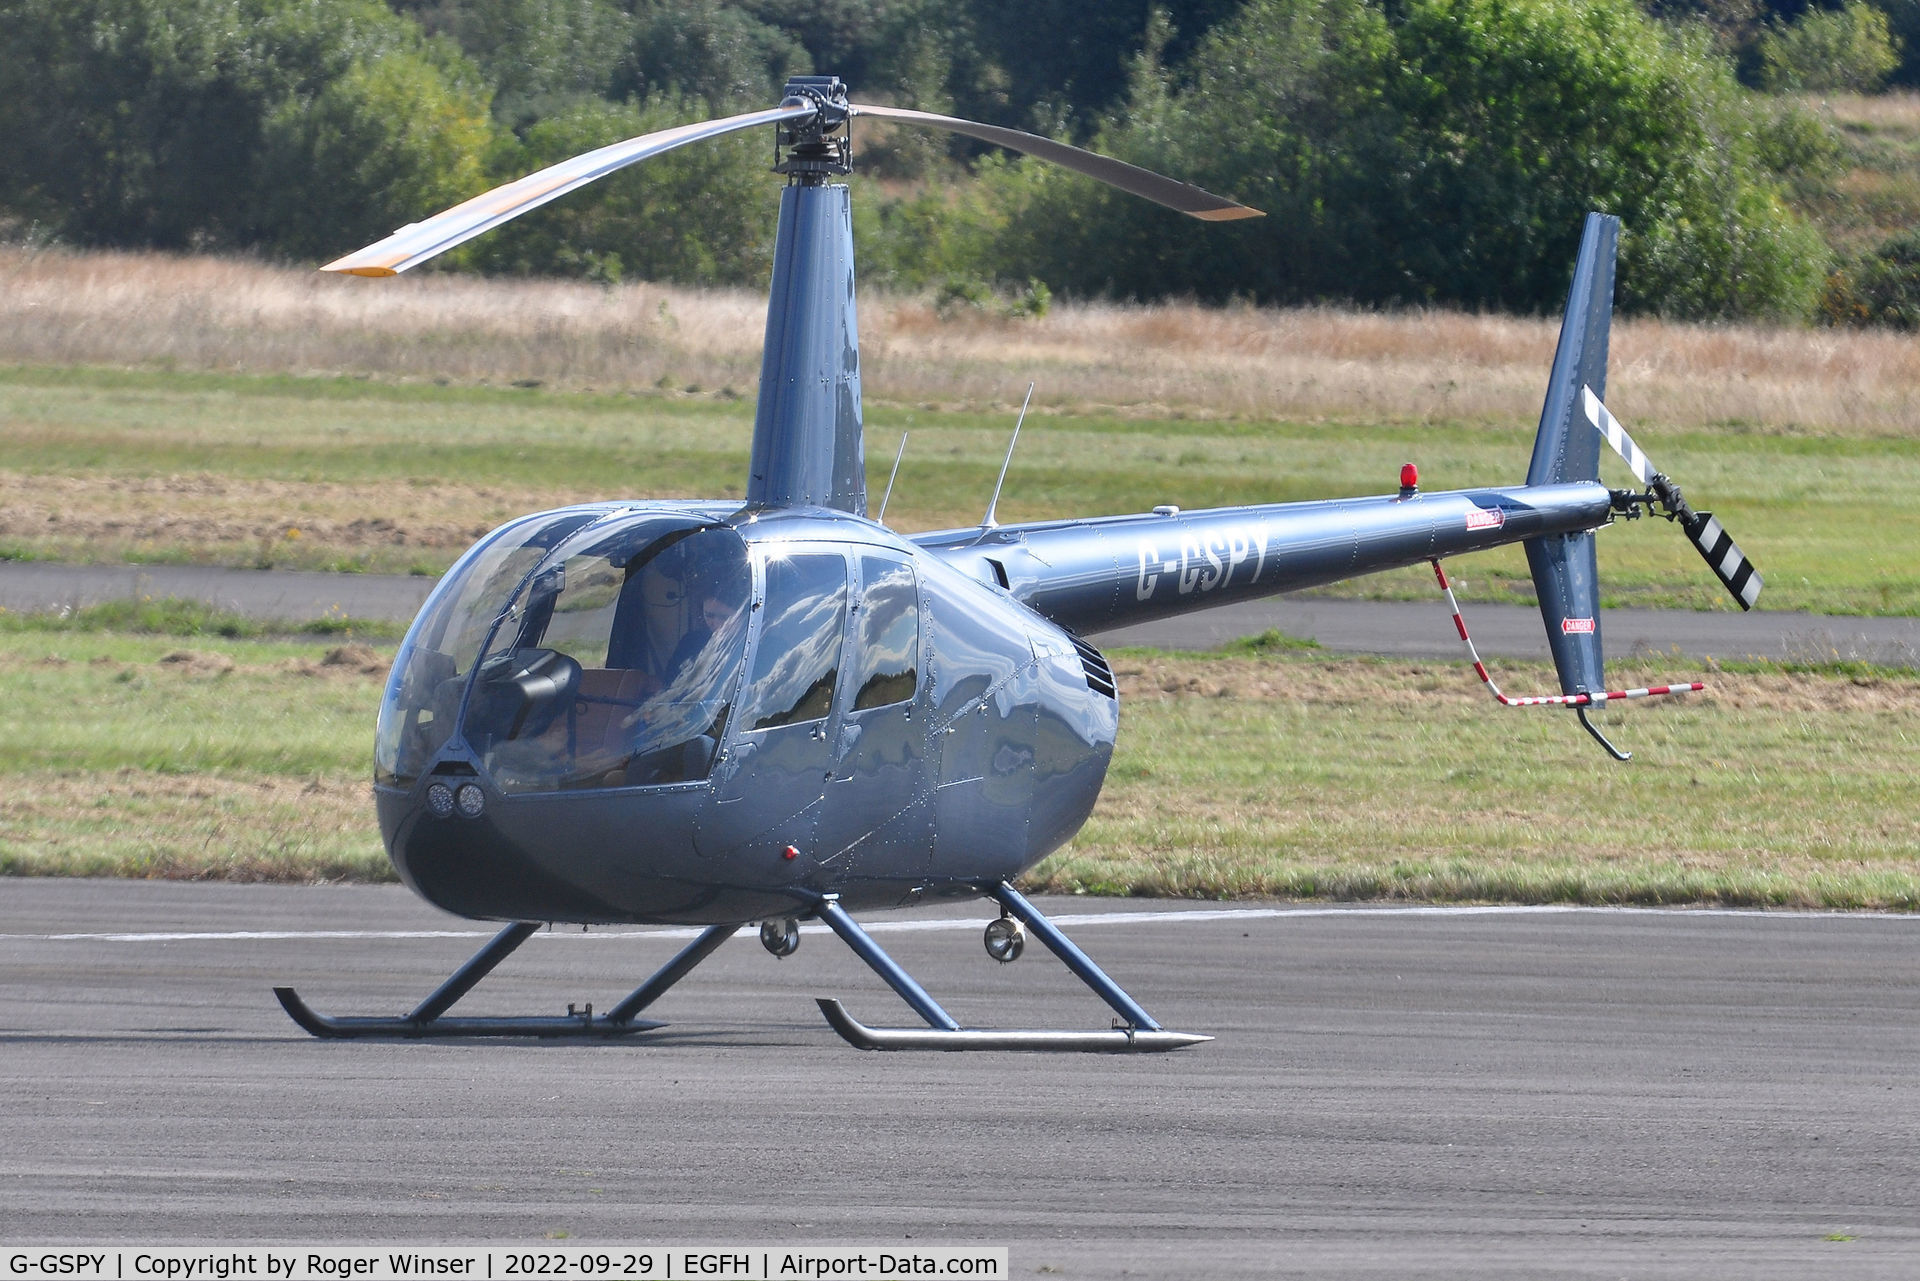 G-GSPY, 2005 Robinson R44 Raven II C/N 10772, Visiting R44 Raven II helicopter operated by Wild Helicopters Ltd.